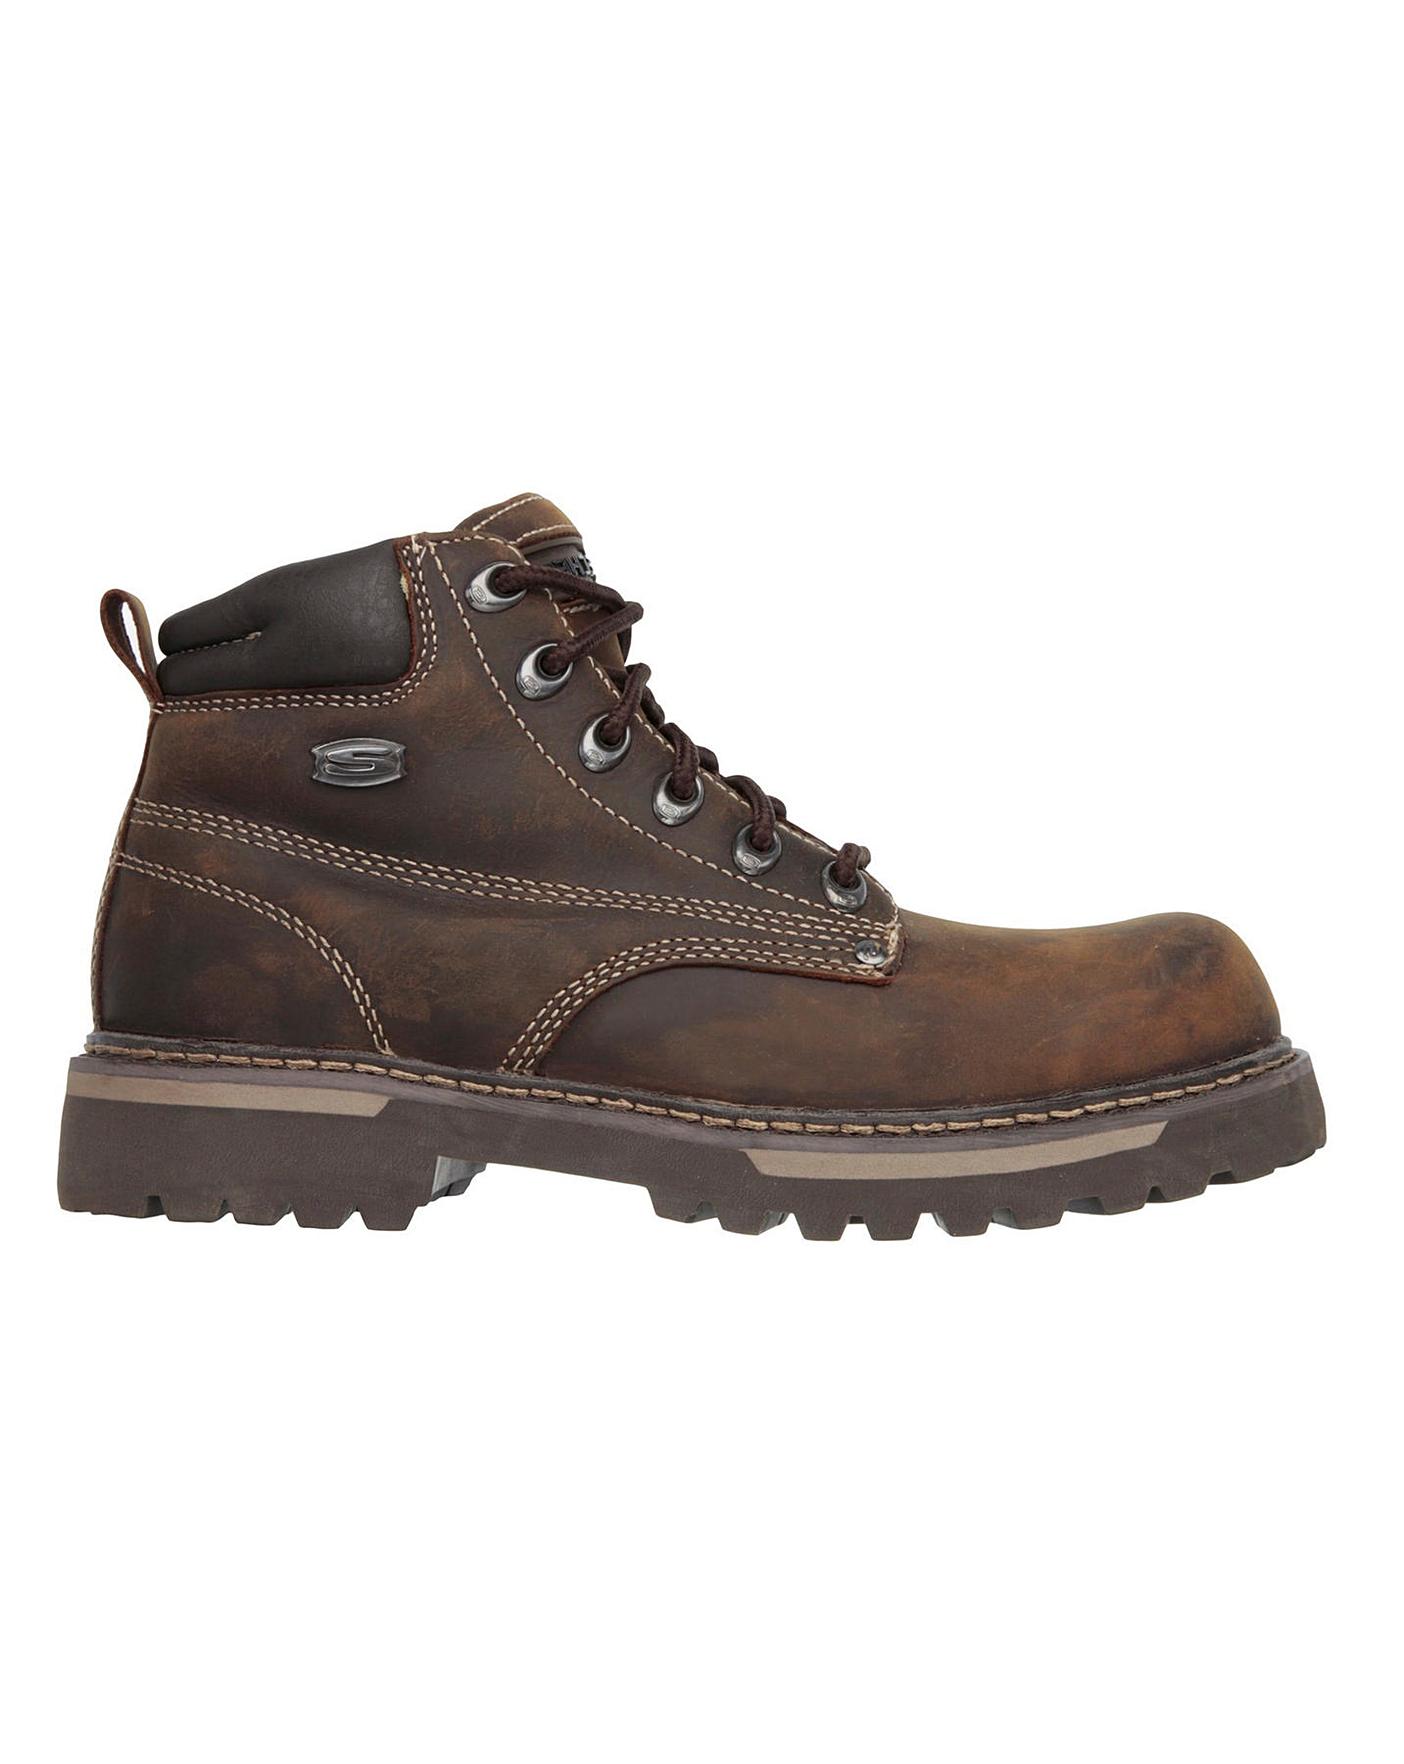 skechers cool cat bully boots